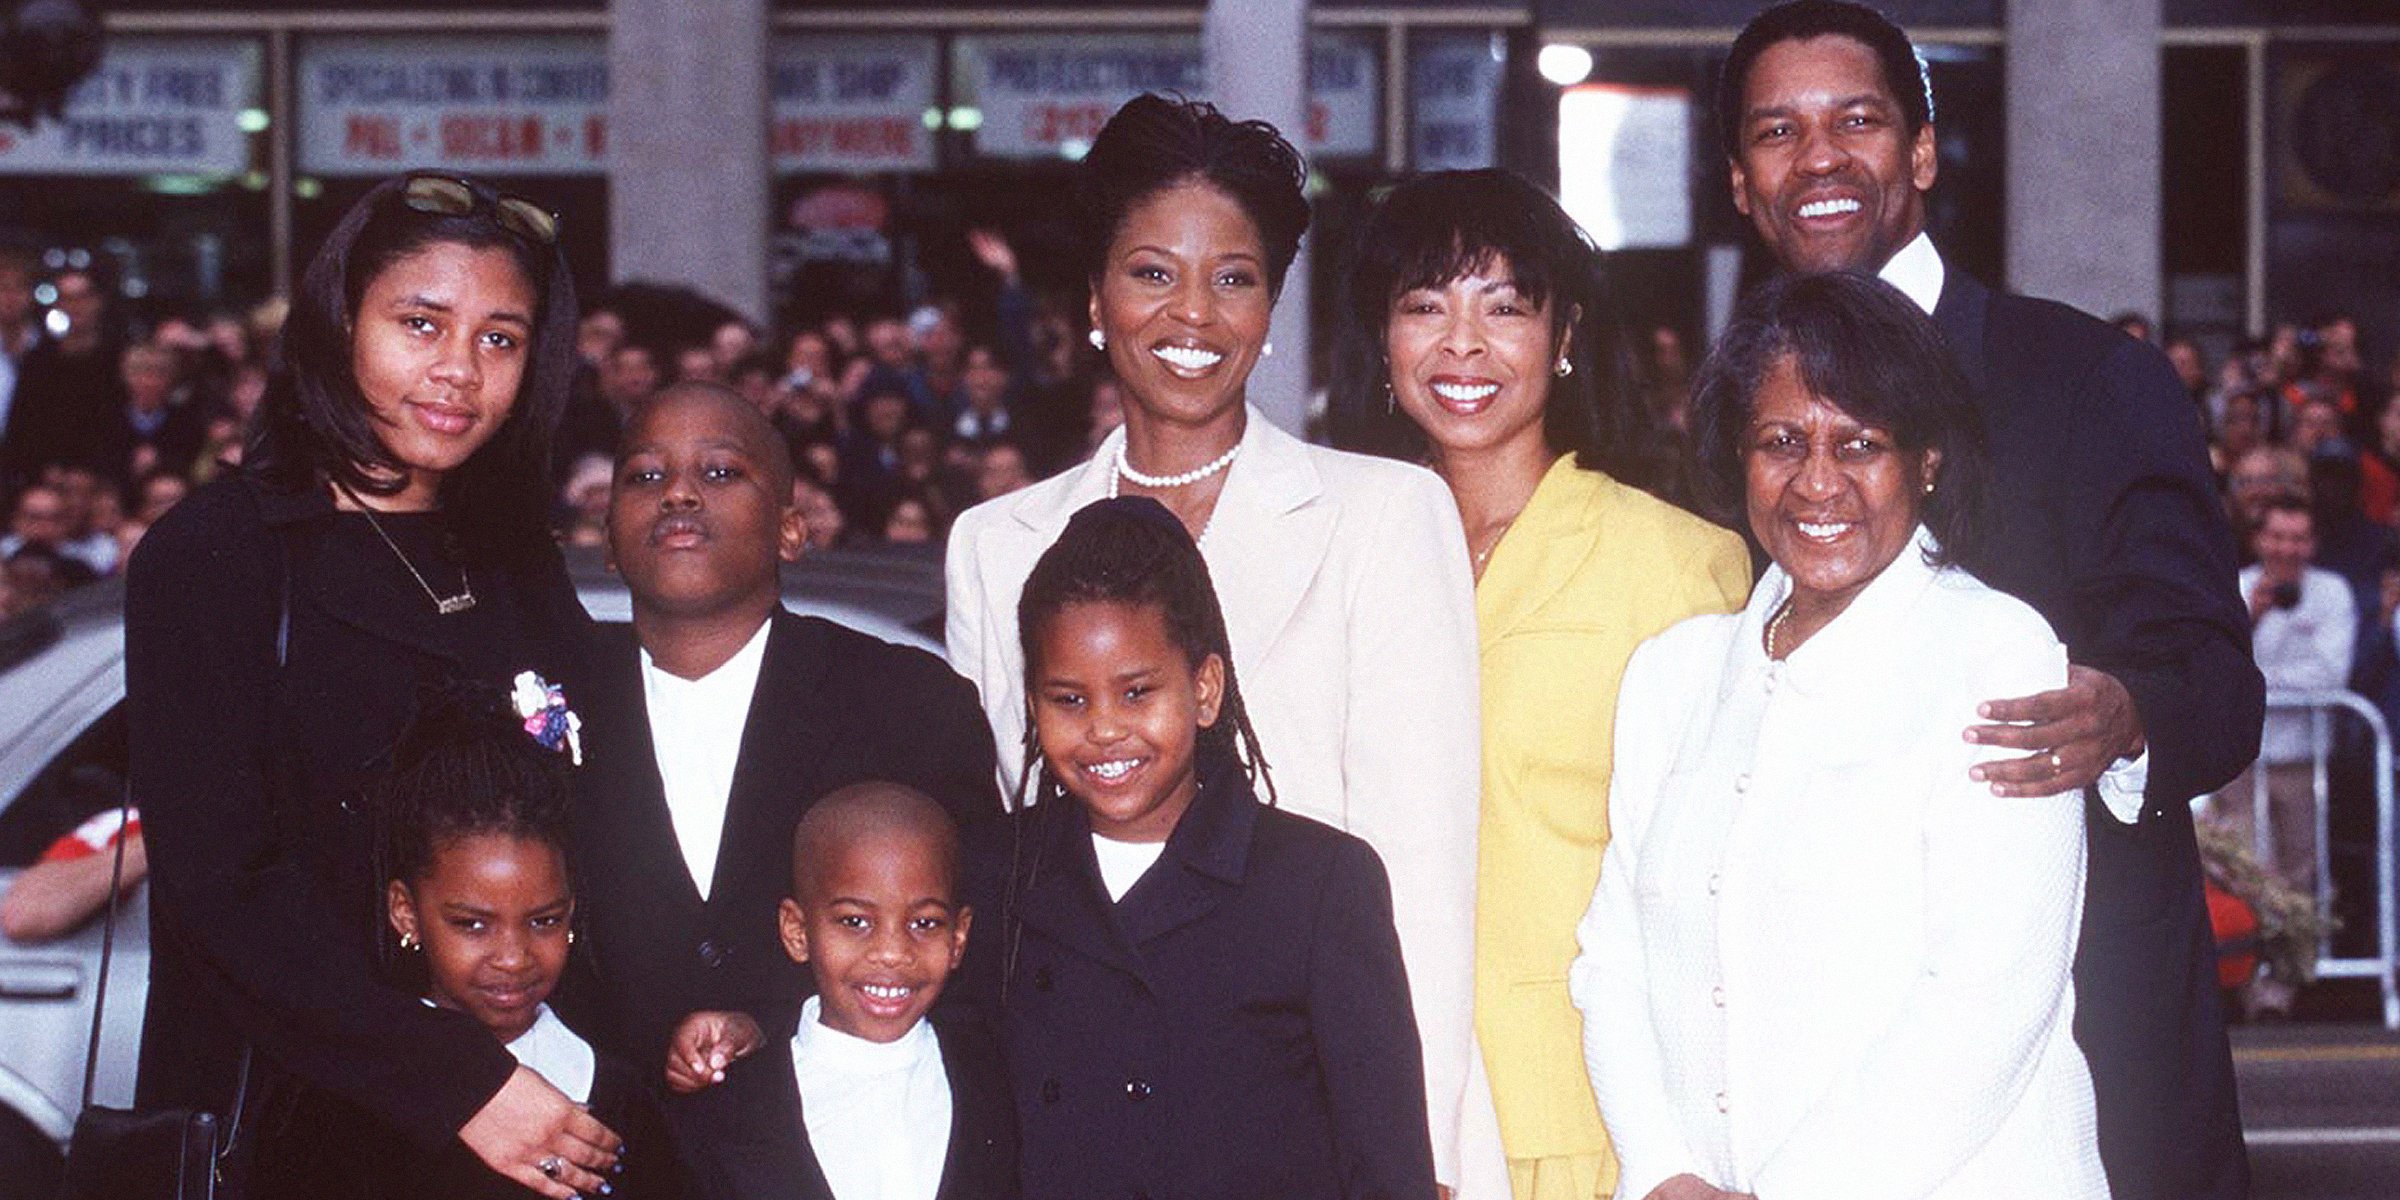 Denzel Washington and family | Source: Getty Images